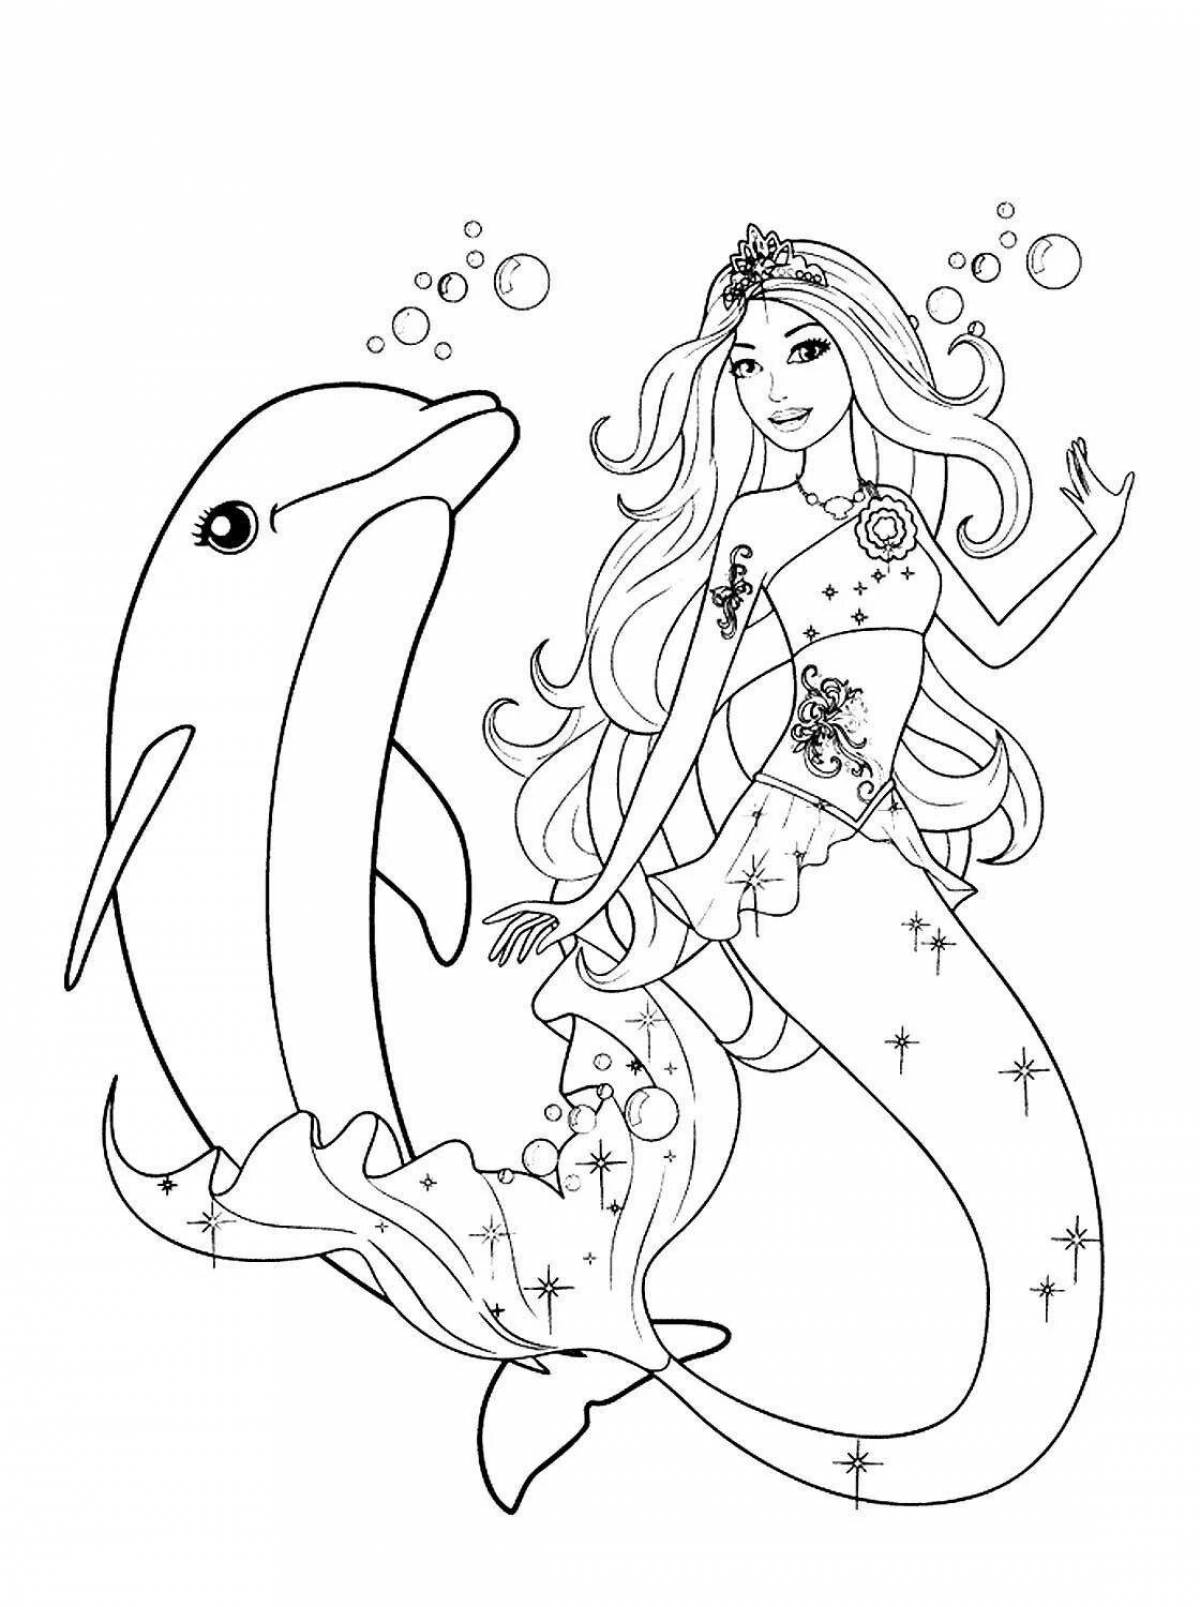 Coloring pages of the little mermaid for girls